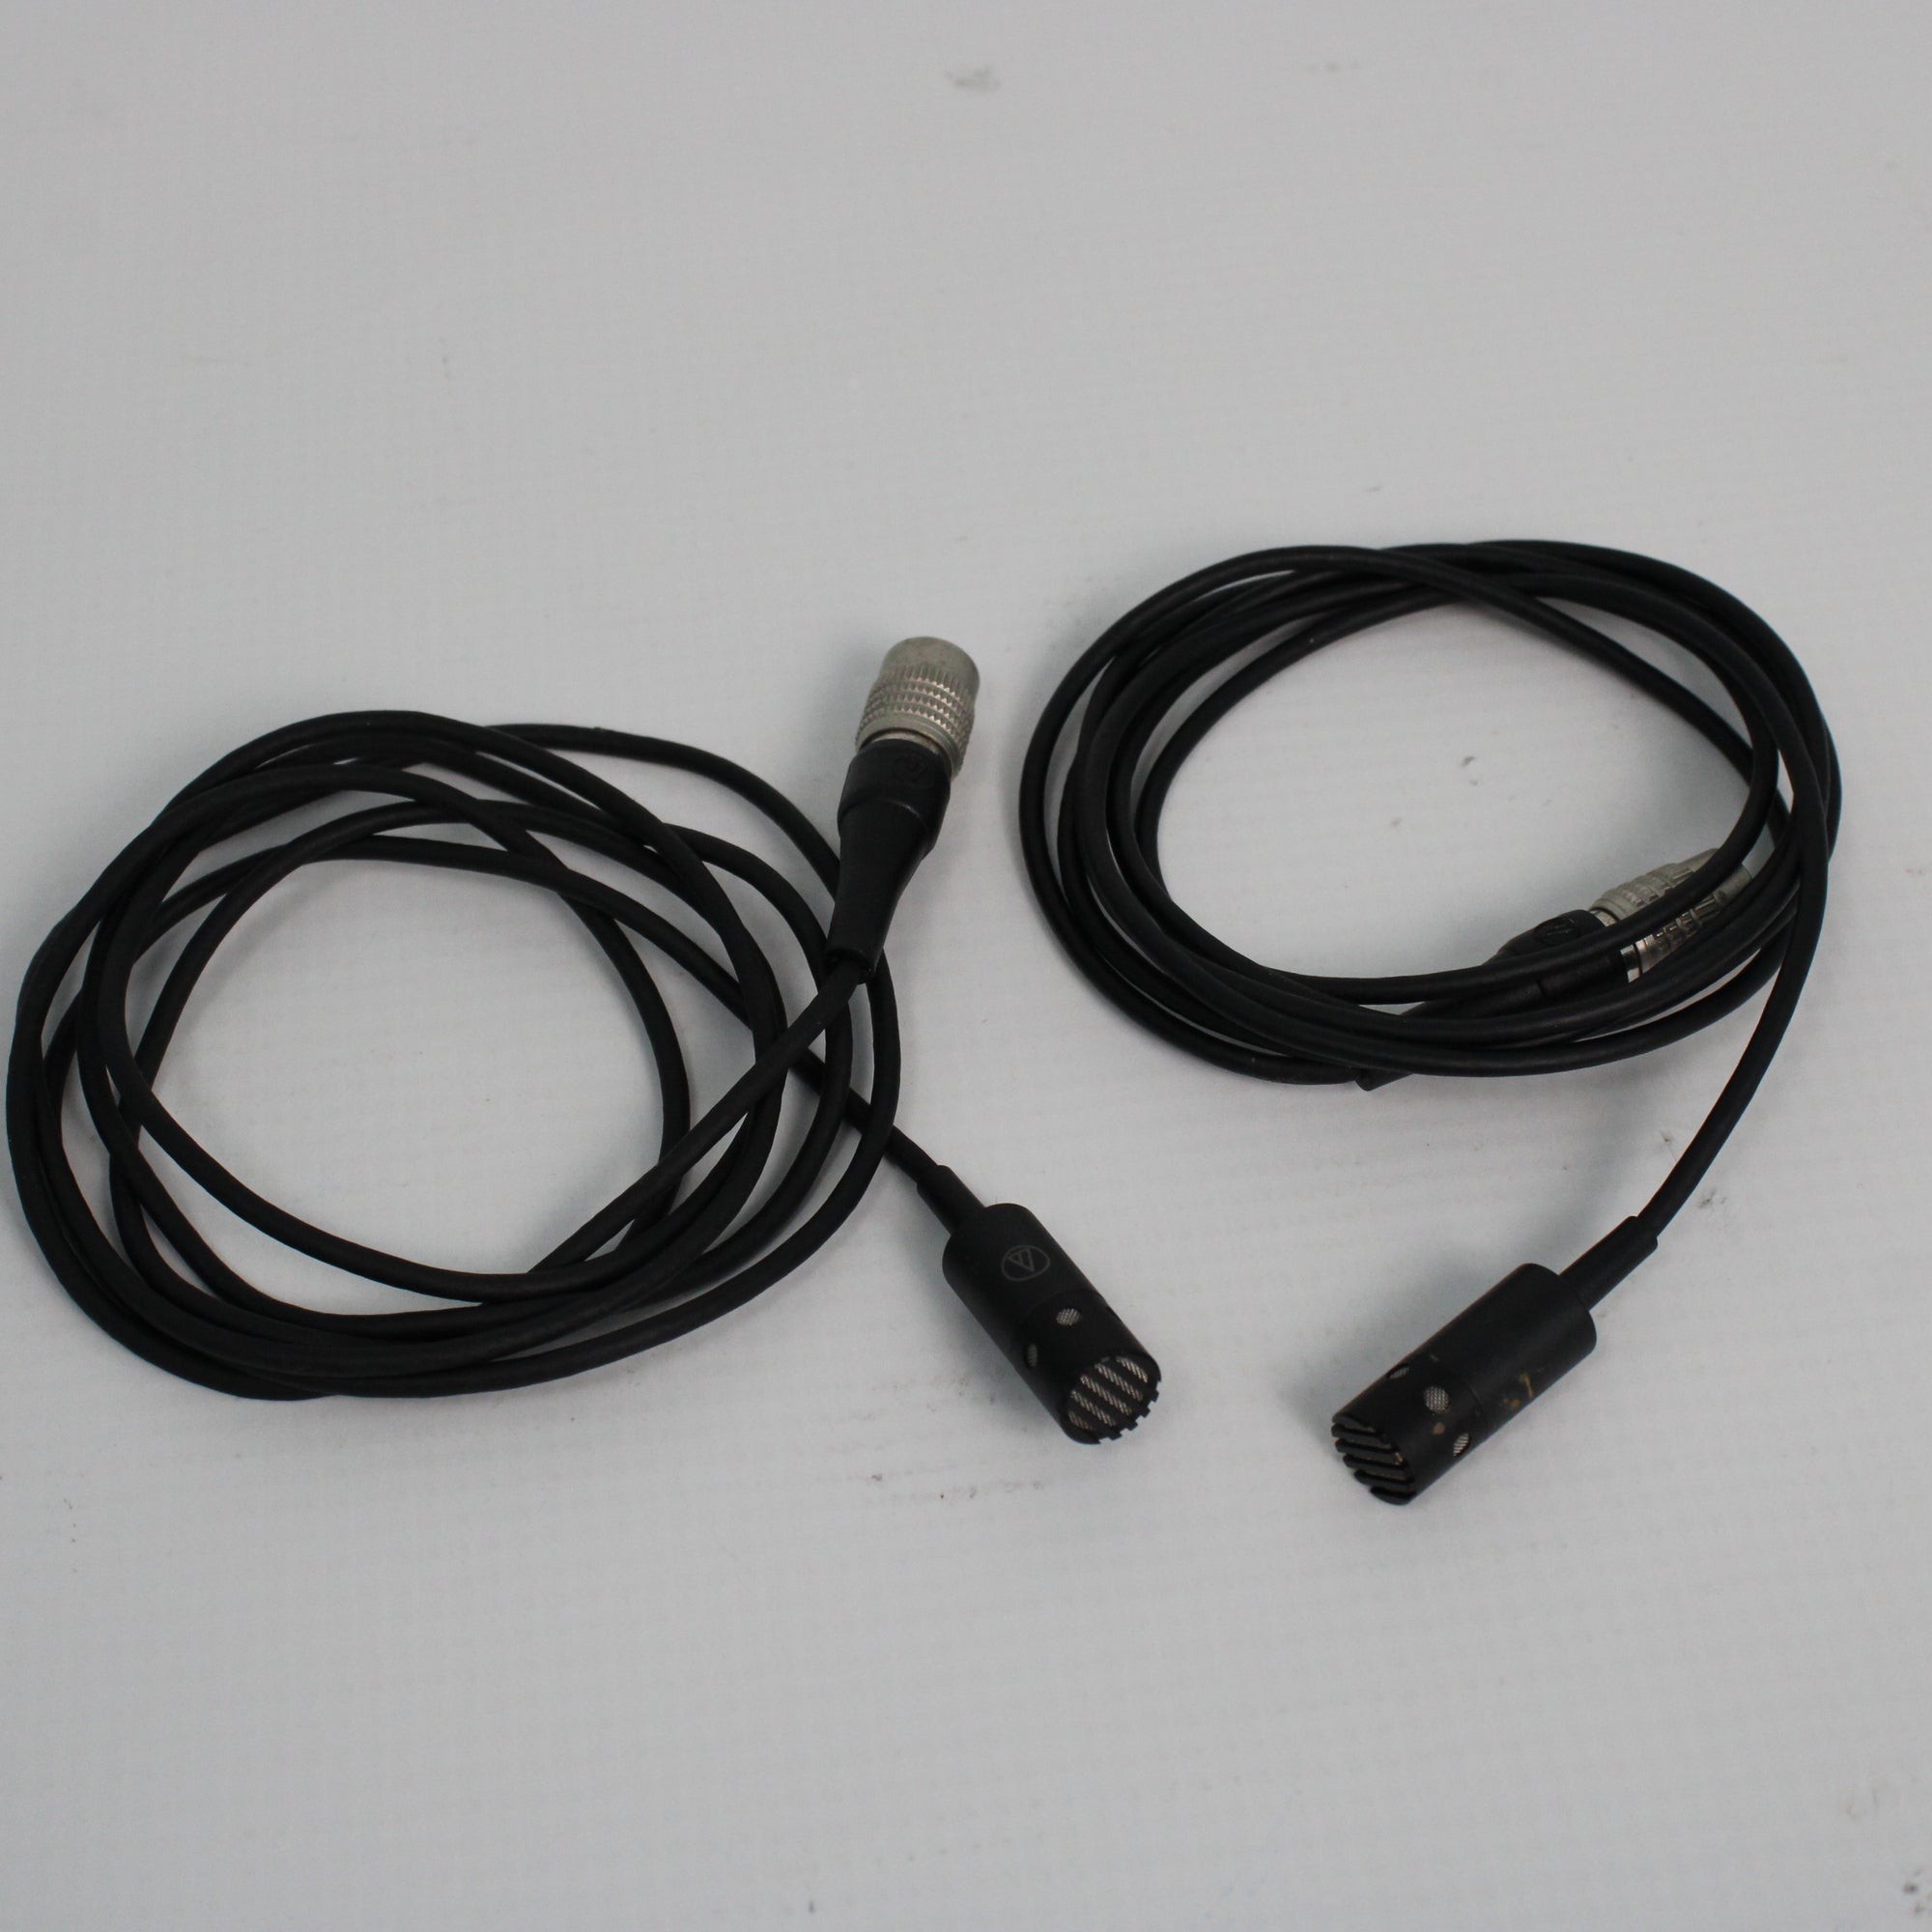 USED Audio Technica AT831cW Lapel Microphones x2 Flat view